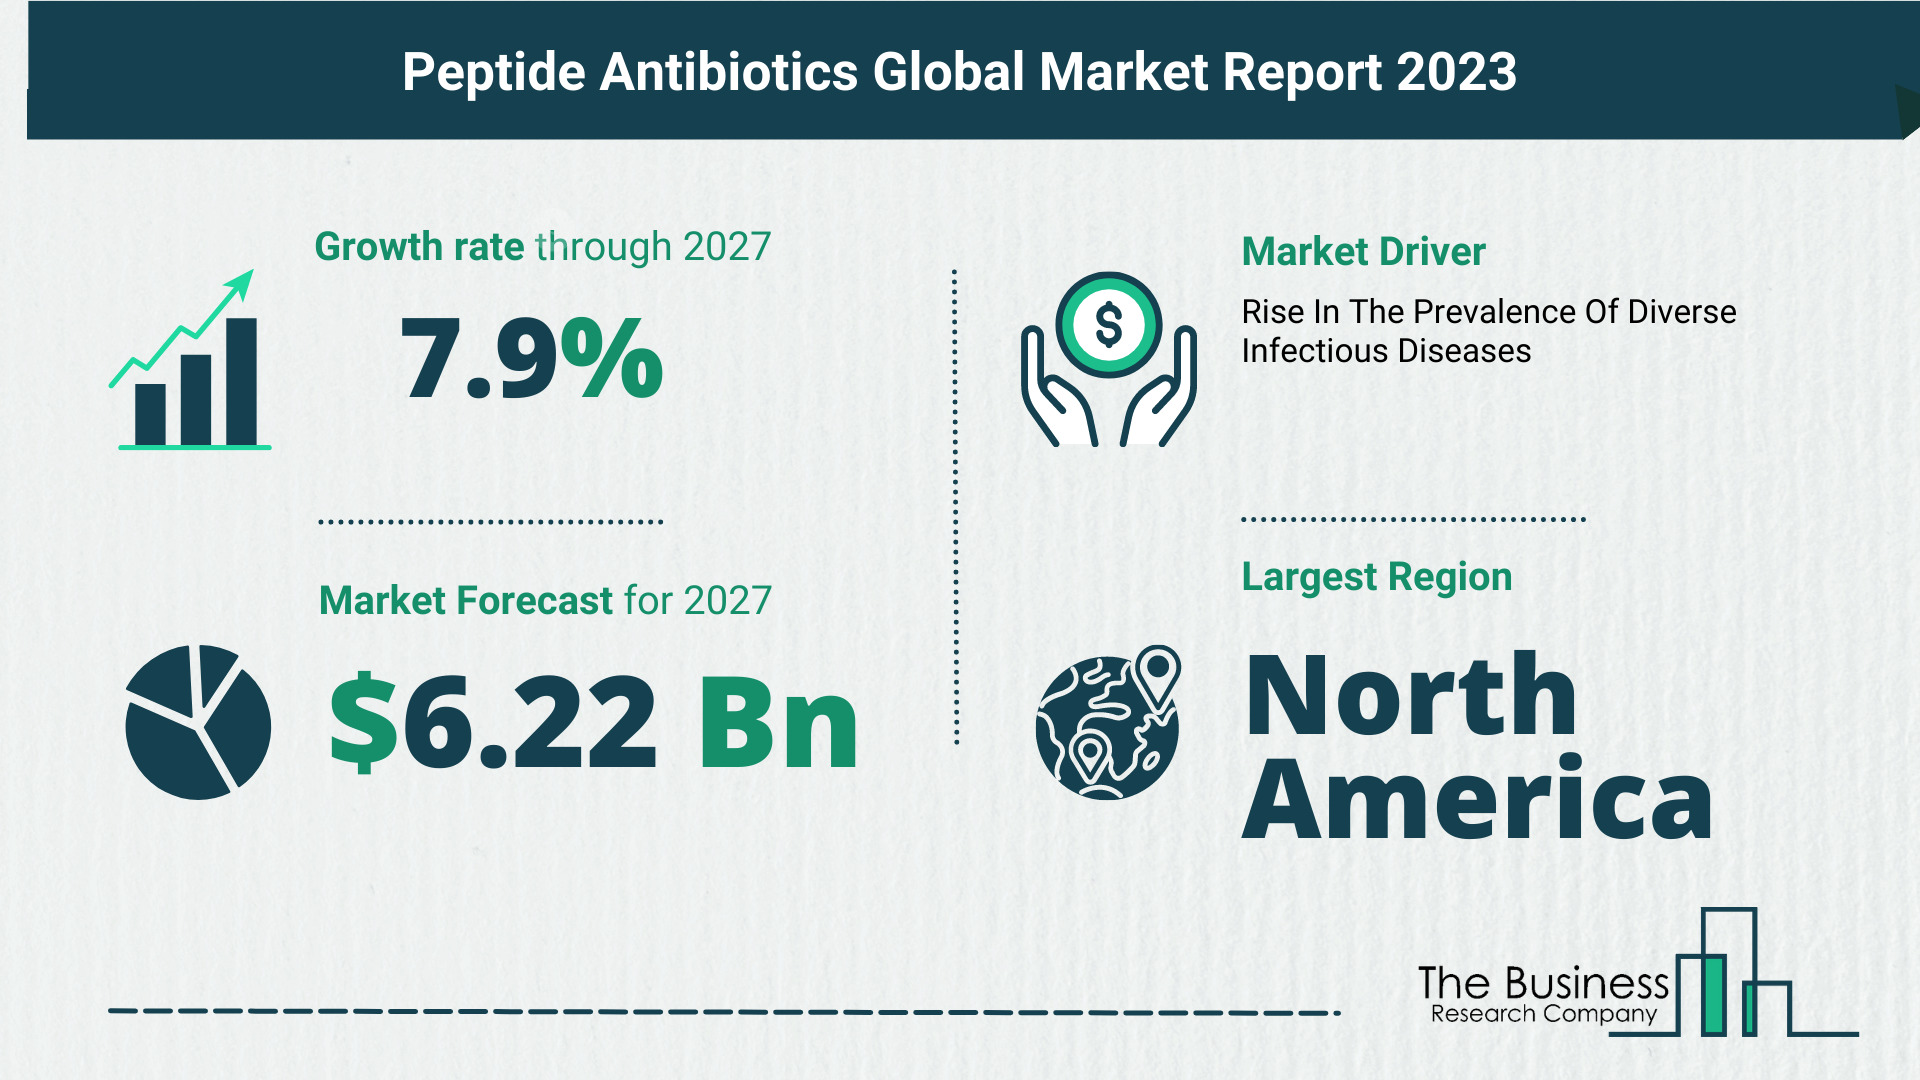 Insights into the Global Peptide Antibiotics Market 2023: Size, Drivers, and Trends